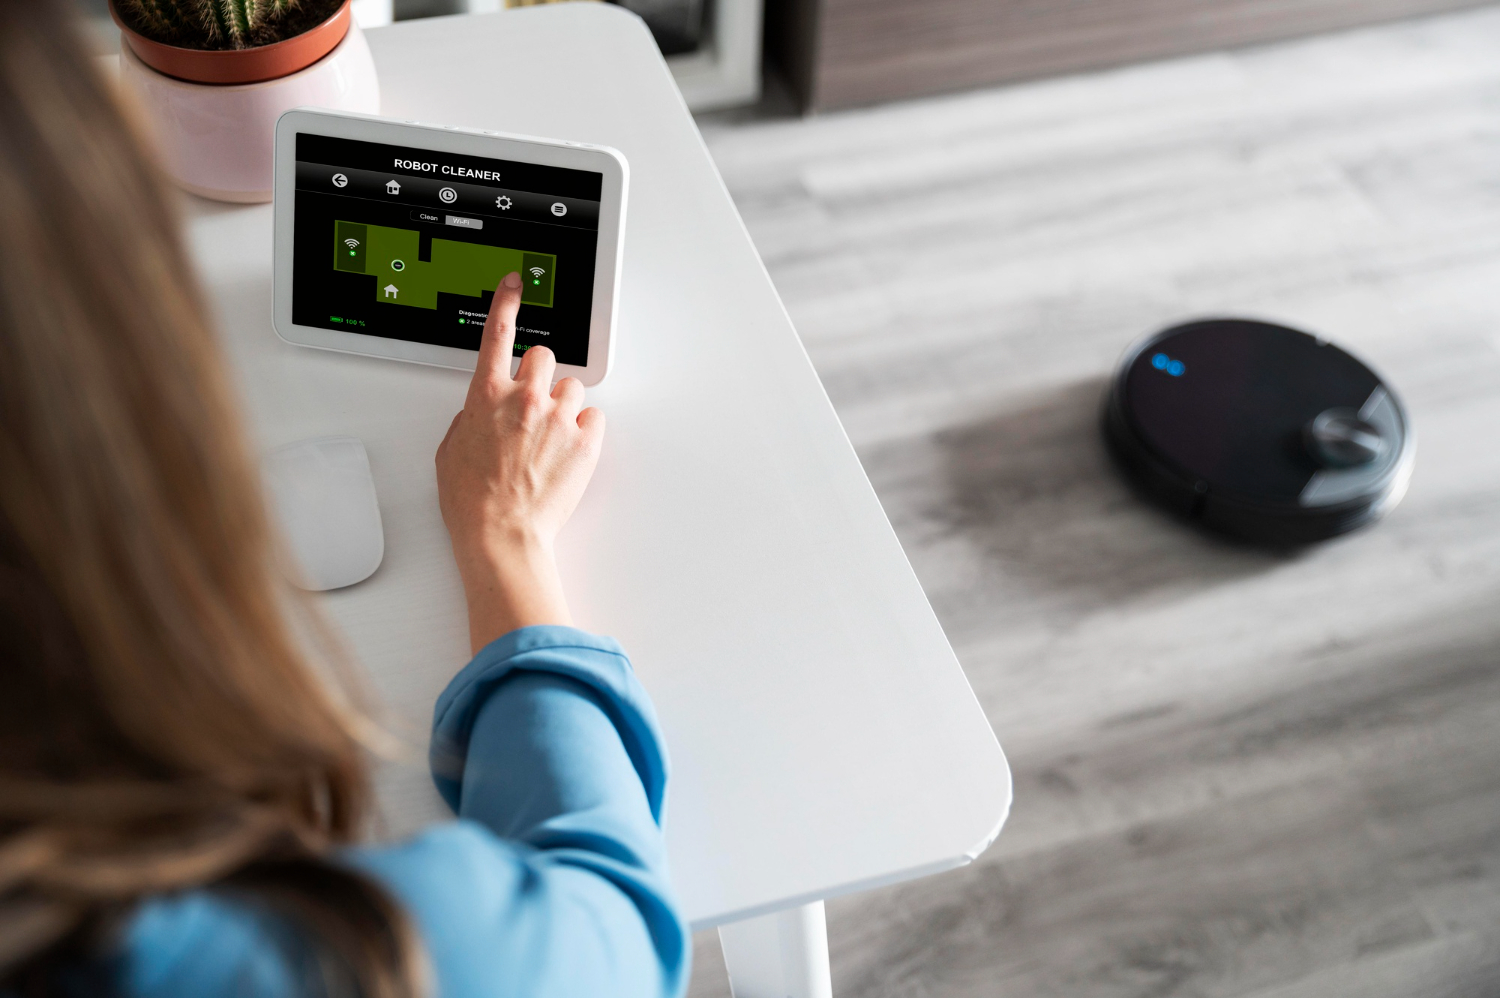 Understanding the concept and benefits of a smart home